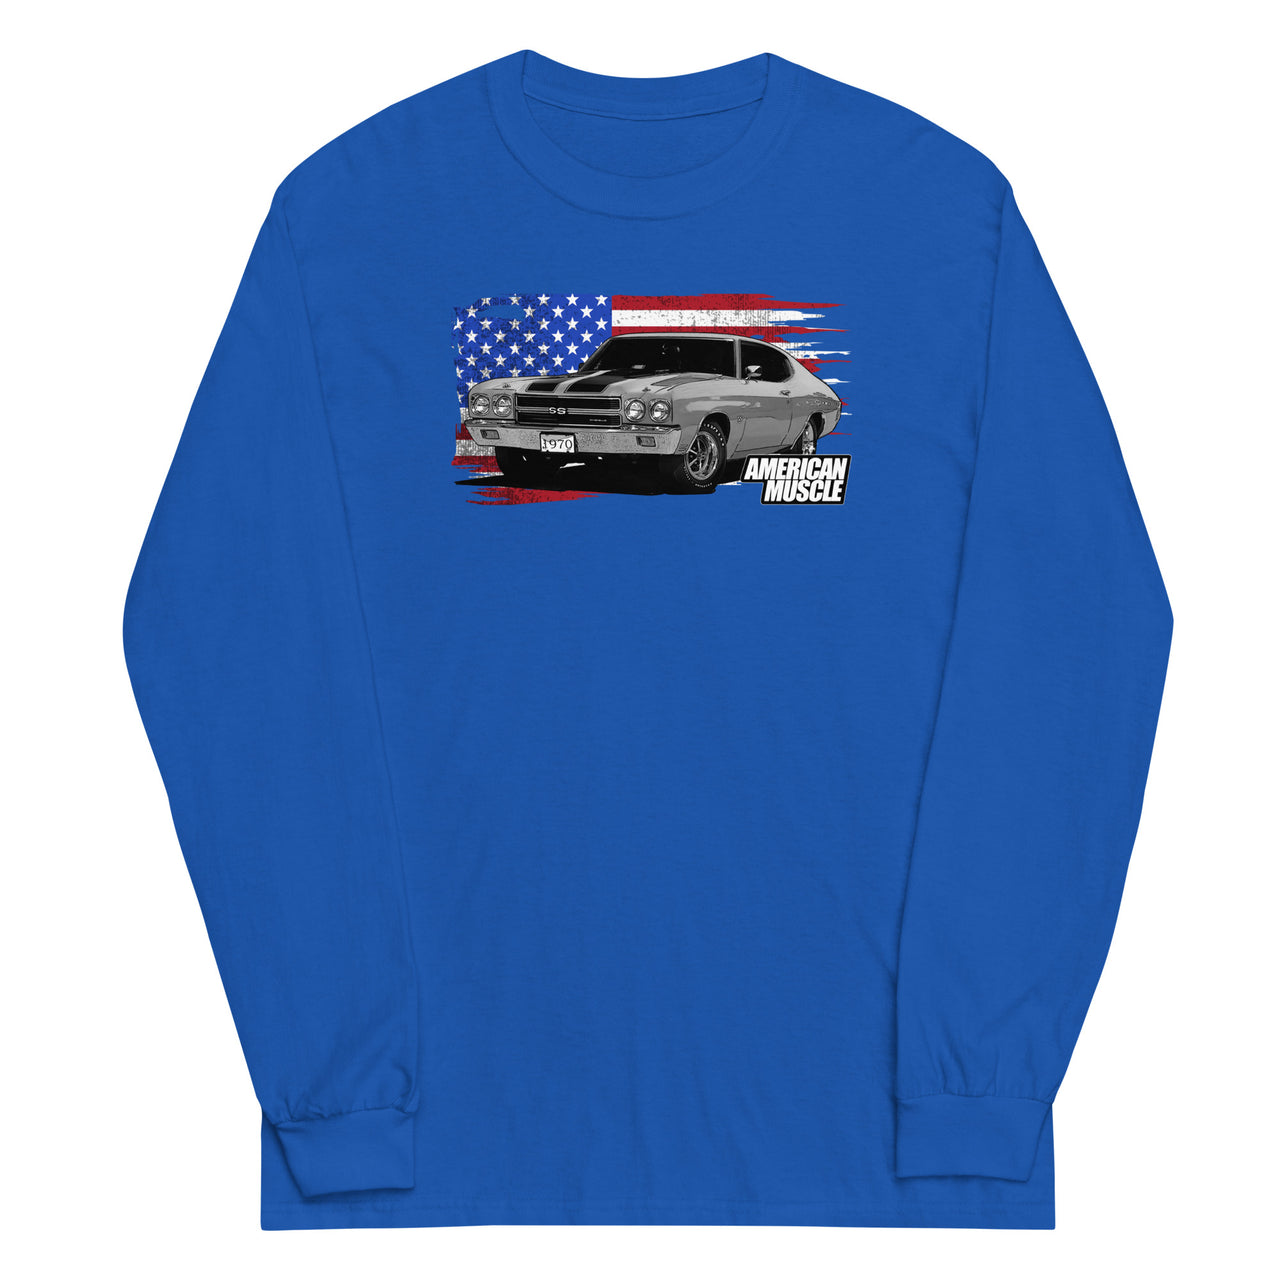 1970 Chevelle Long Sleeve Shirt in royal